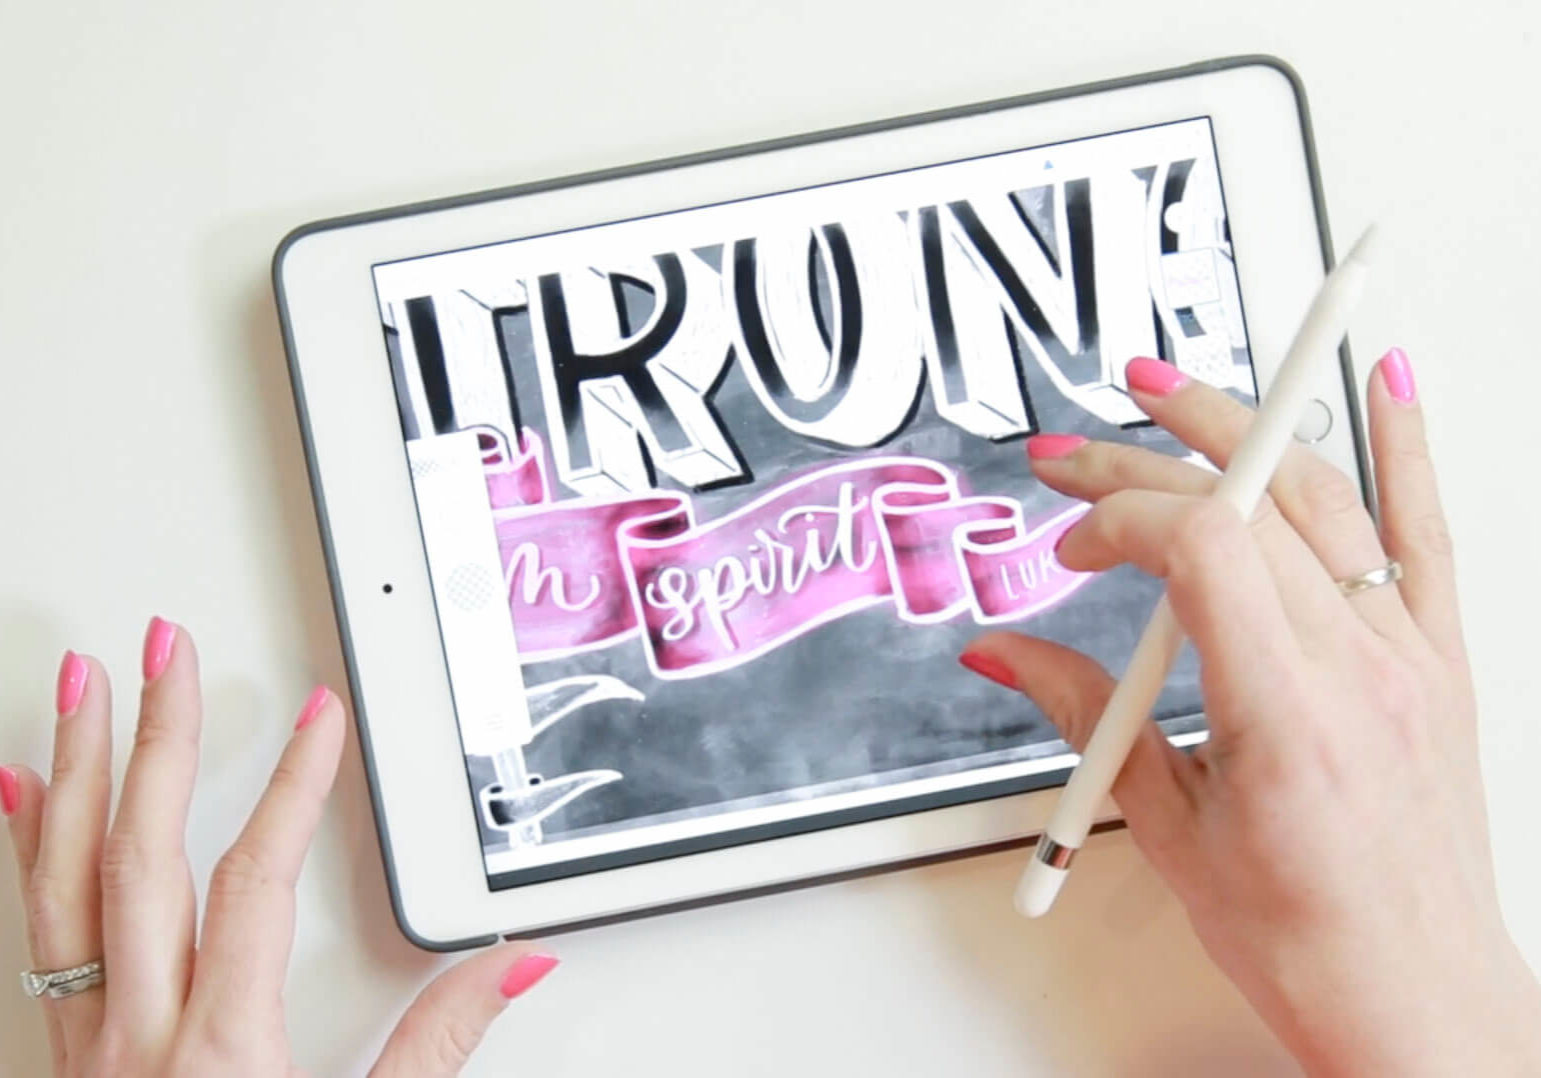 Take your lettering skills to the next level with this advanced online power course from amandaarneill.com taught by Amanda Arneill and Alisse Courter where you will learn how to successfully use and blend colors, embellish your letters and letter on different surfaces like glass, chalkboard, wood and canvas to create stunning pieces.